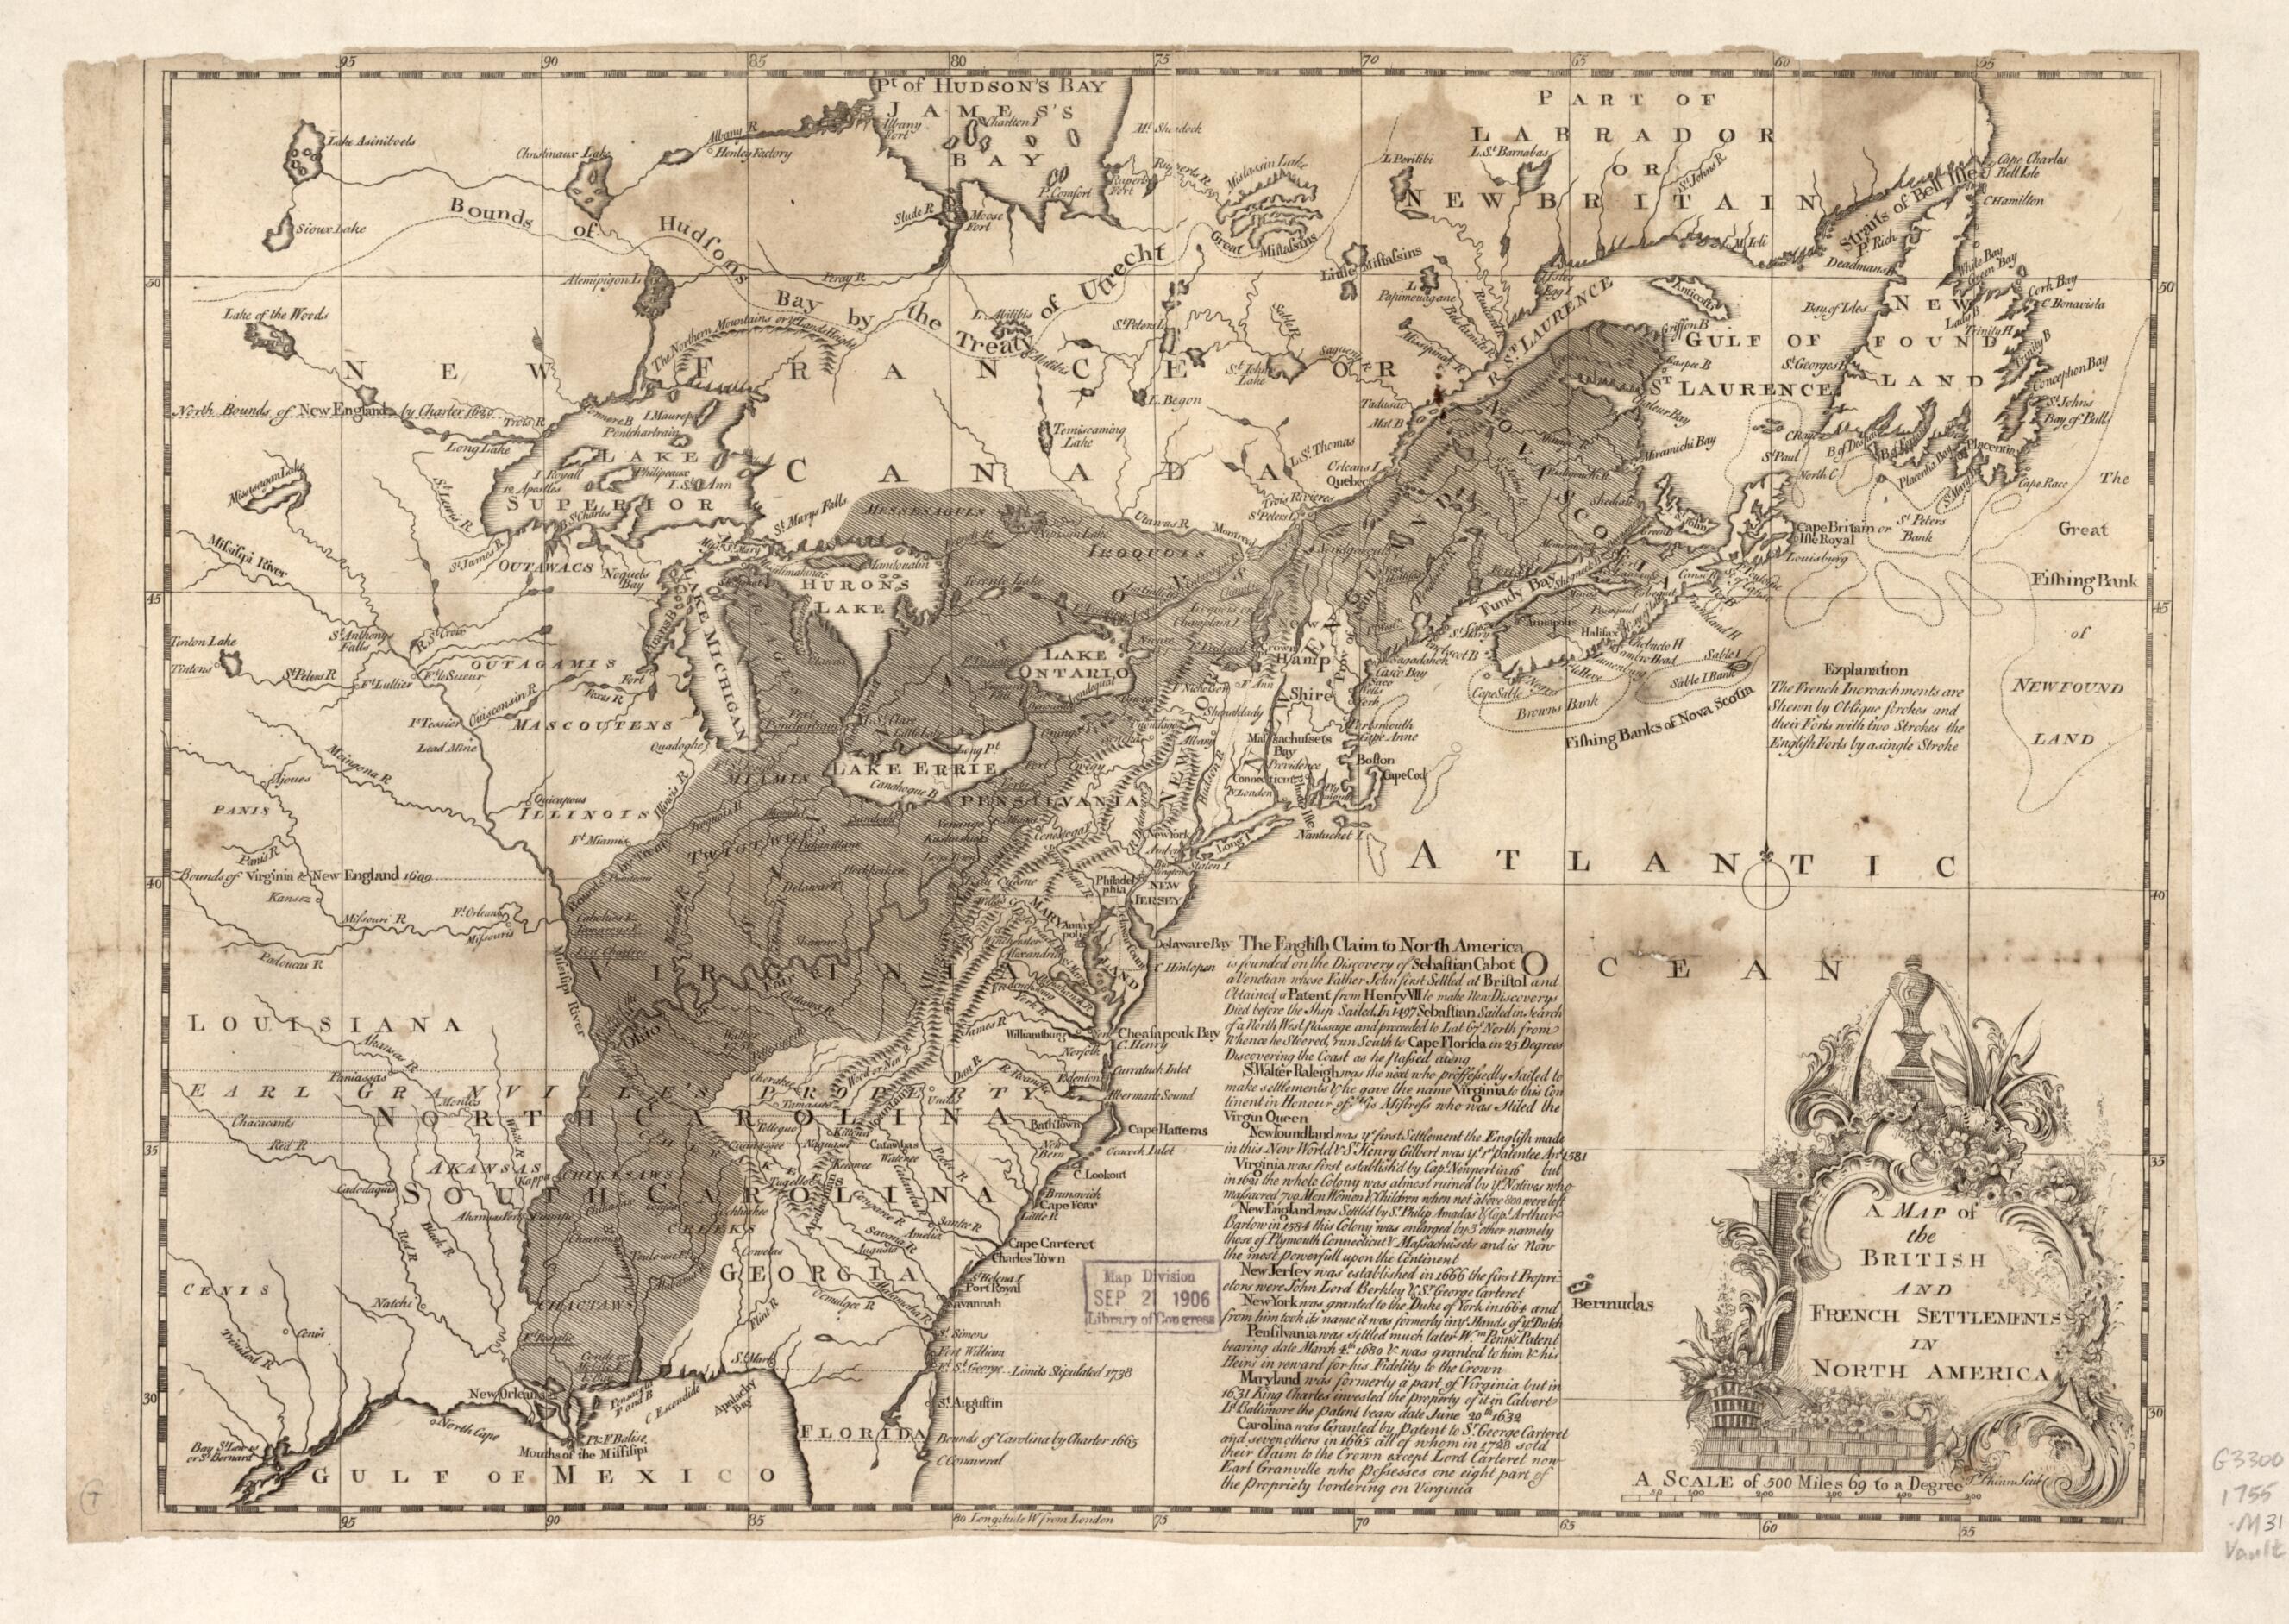 This old map of A Map of the British and French Settlements In North America from 1755 was created by Thomas Phin in 1755